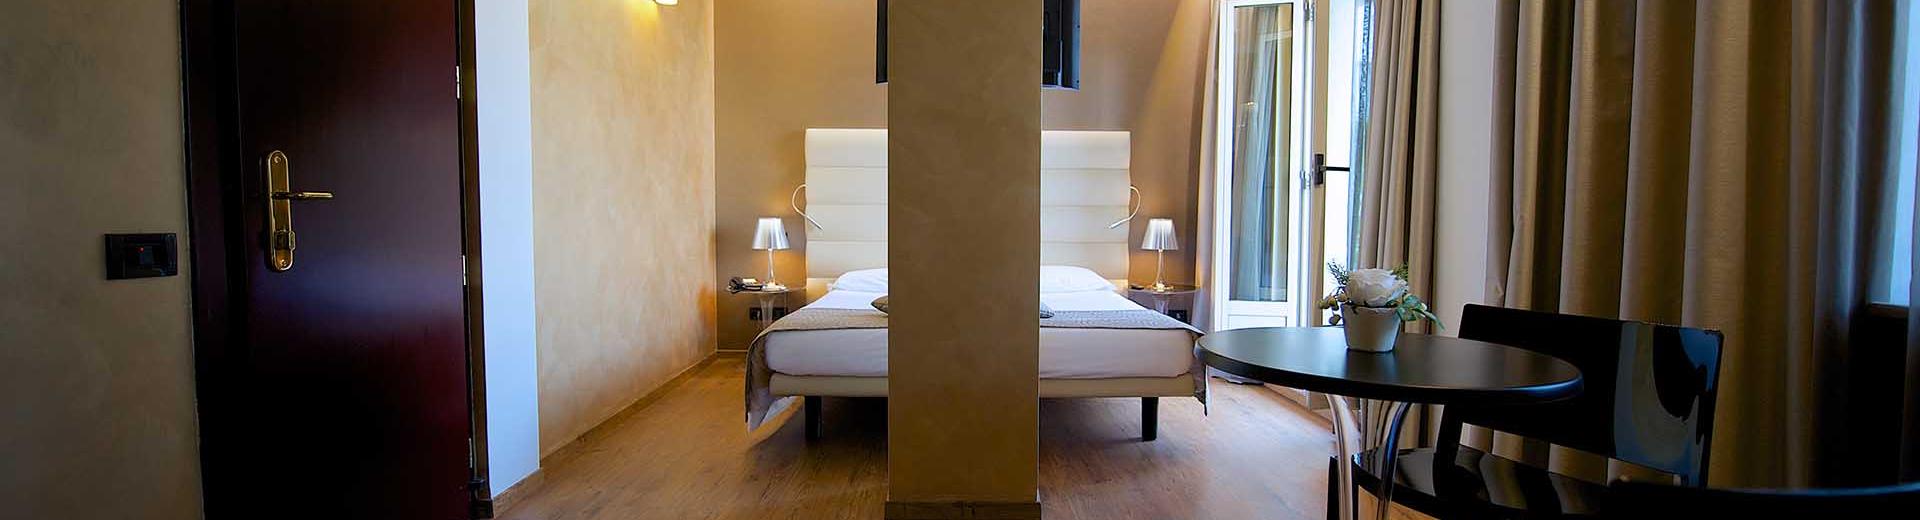 Elegance in the superior rooms of the best Western Hotel Luxor 4 star hotel in Turin